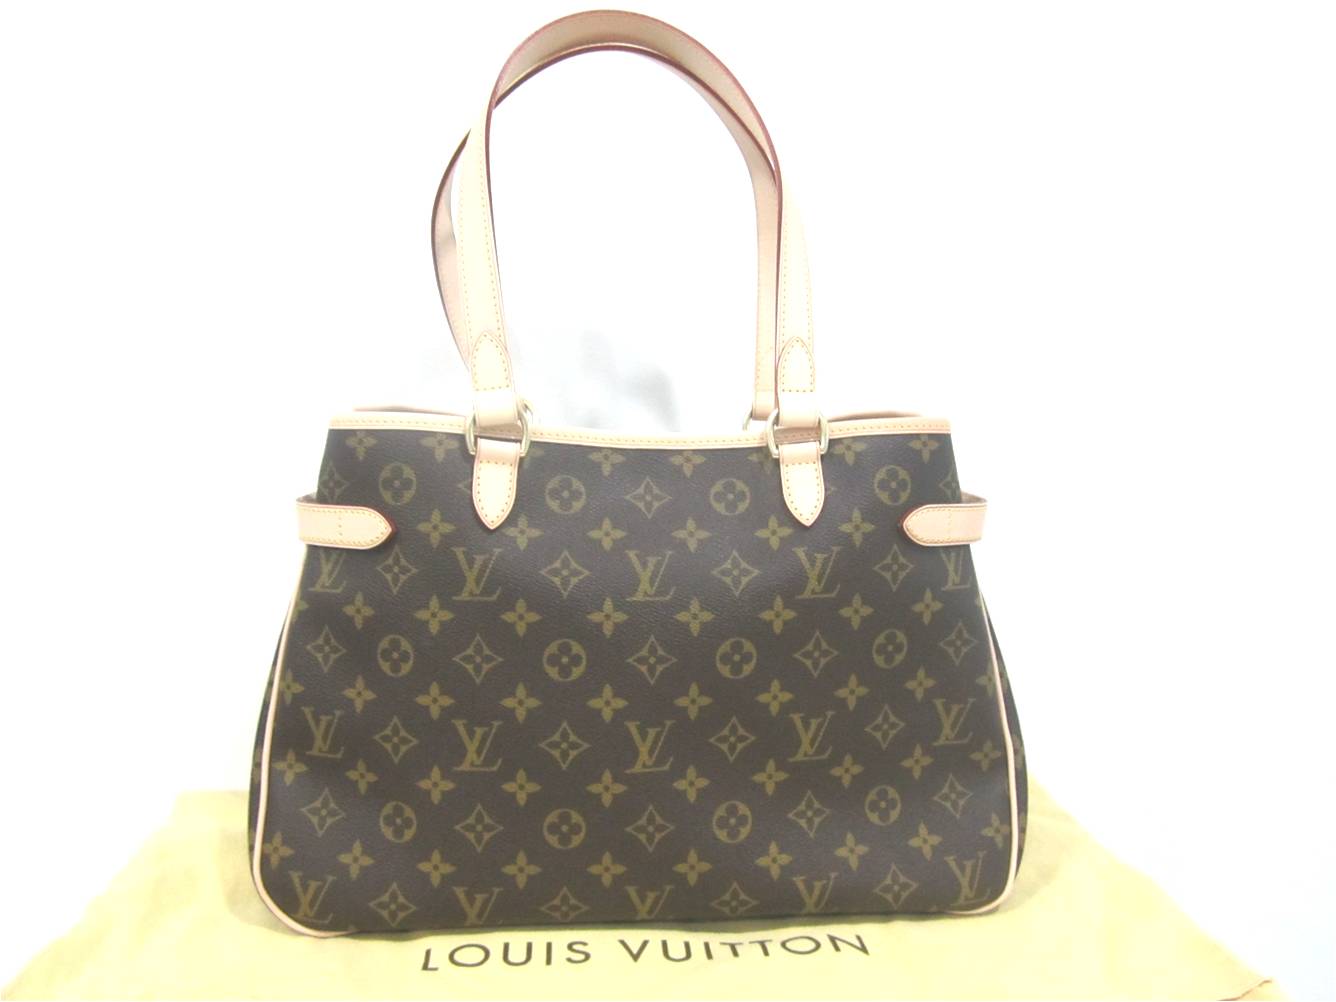 The Bags Affairs ~ Satisfy your lust for designer bags: LOUIS VUITTON MONOGRAM CANVAS ...